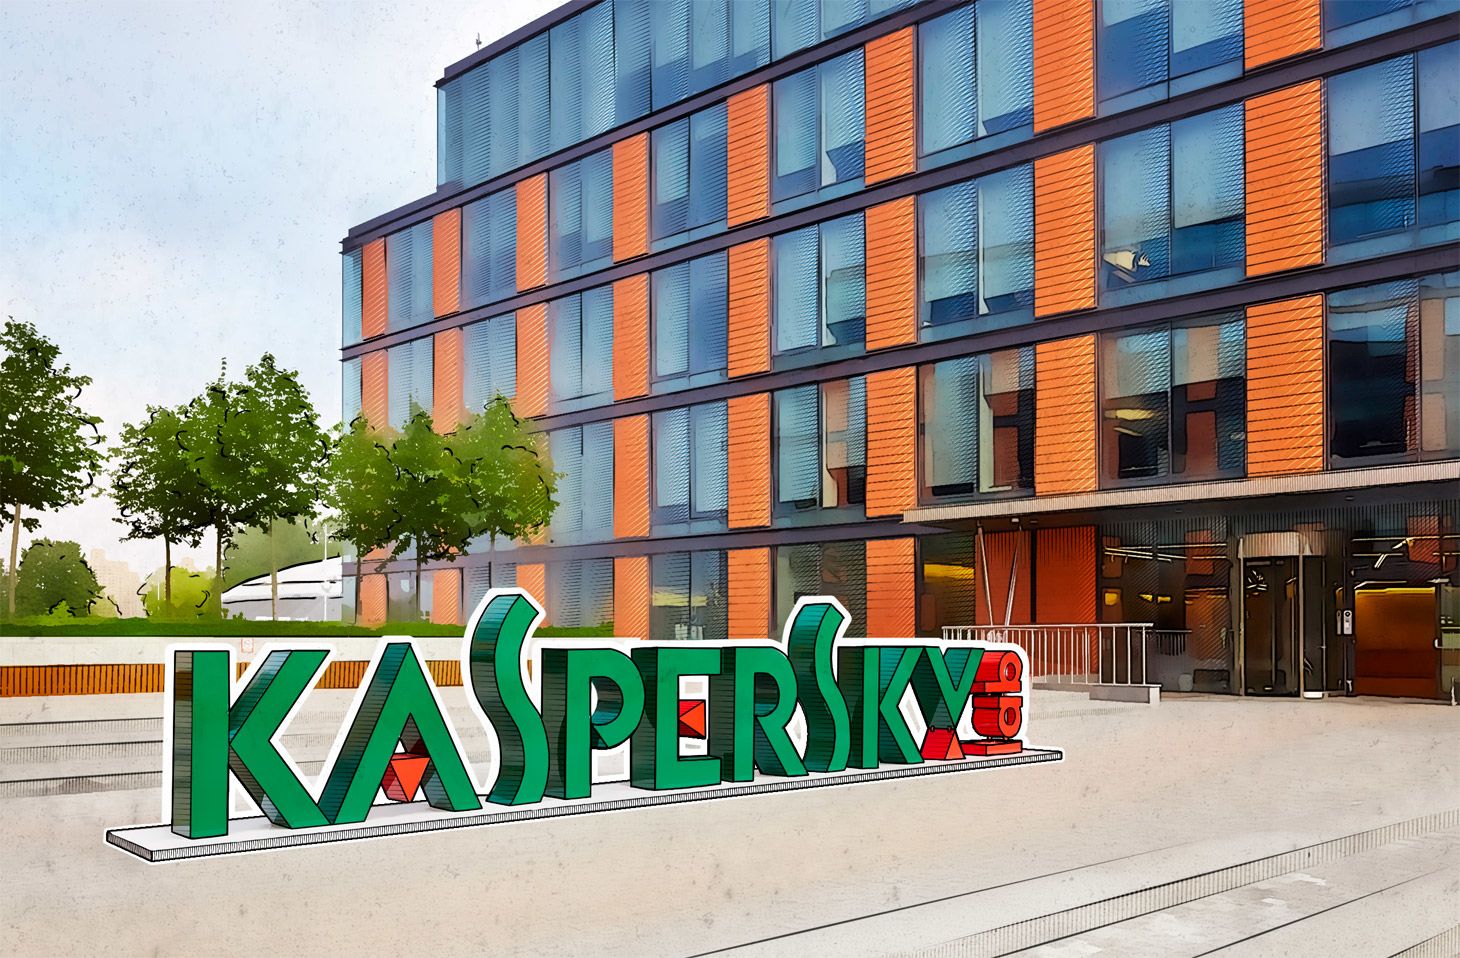 Up to 10% off Kaspersky Coupon Code 2022